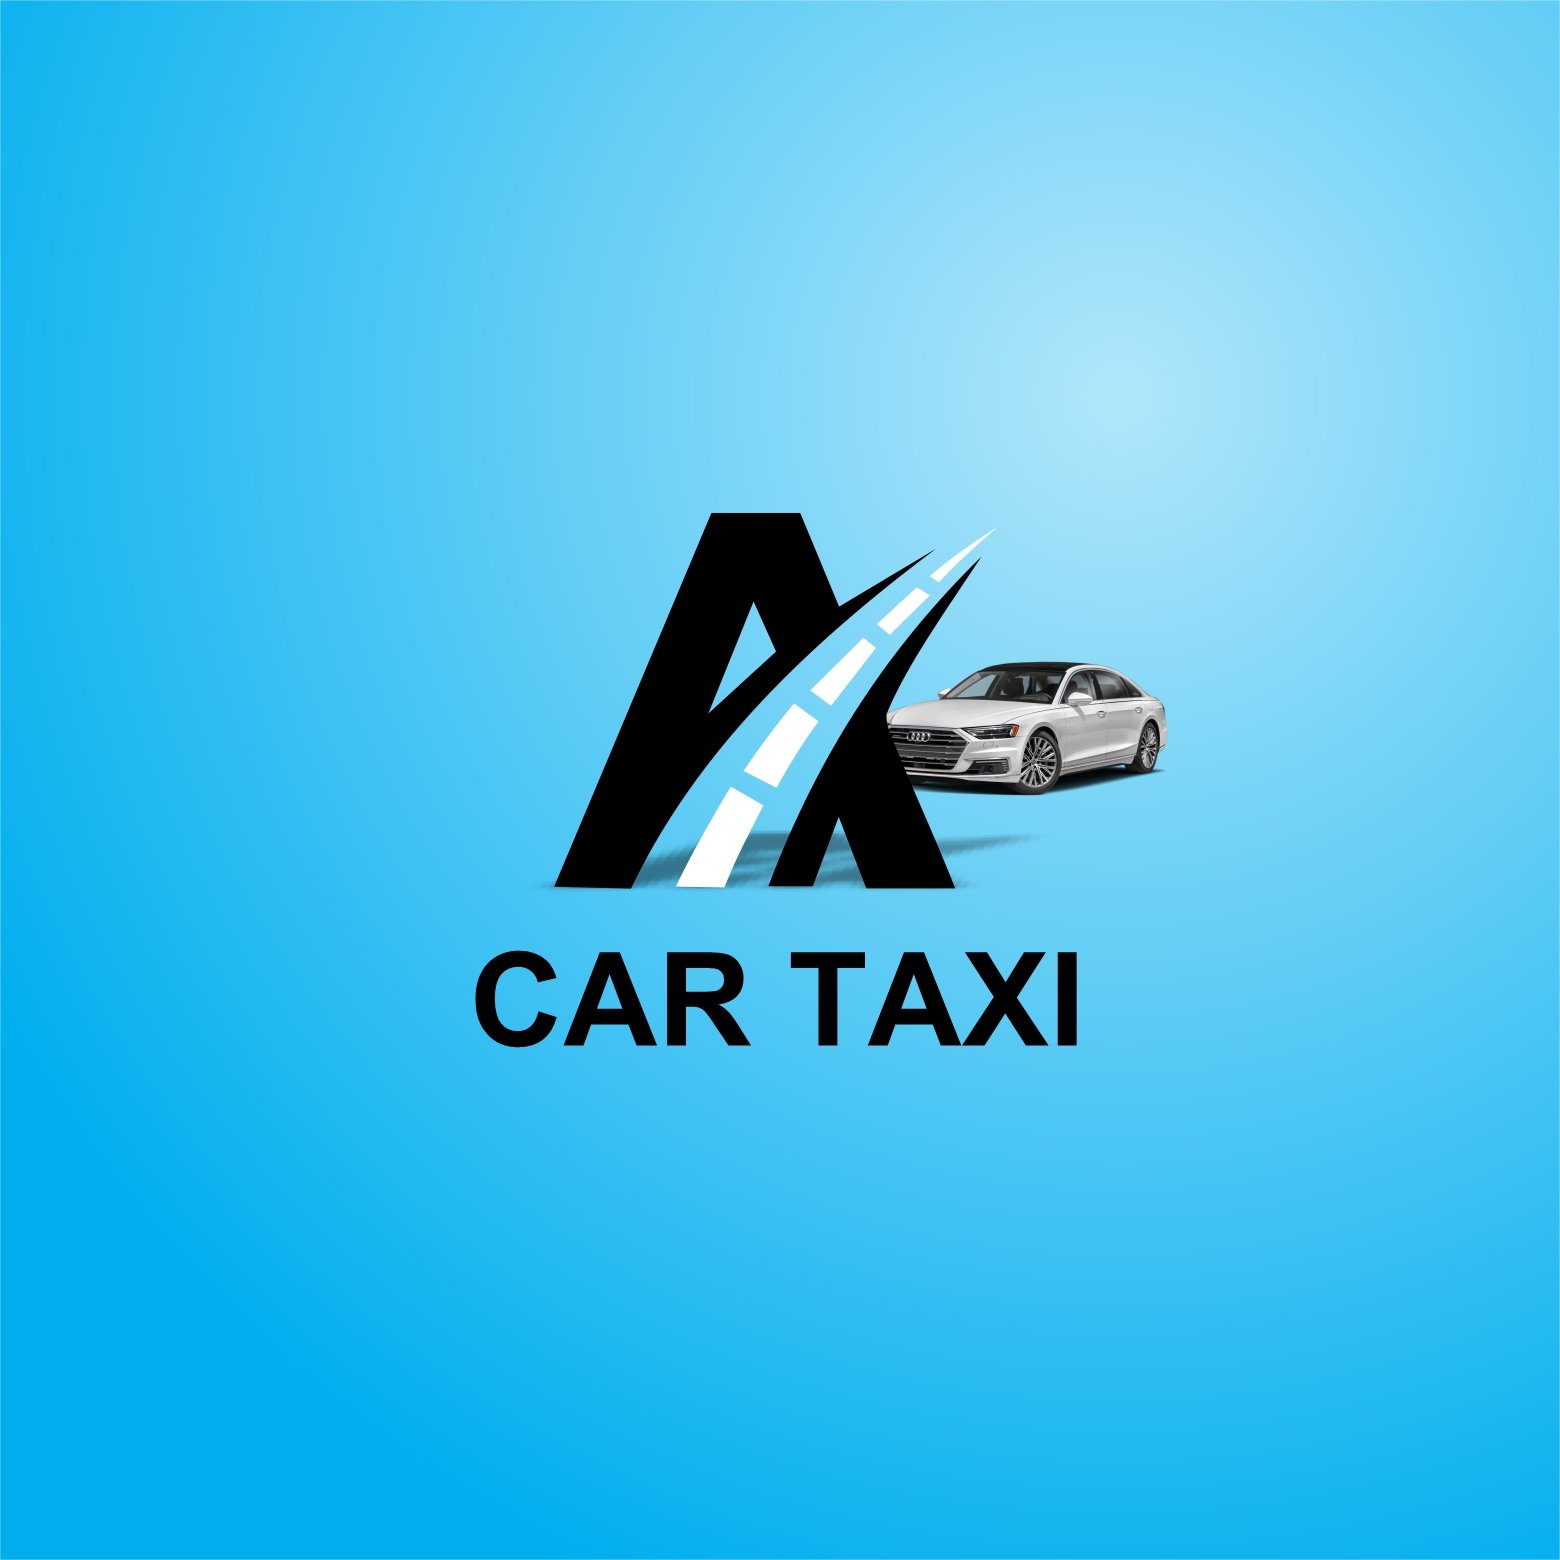 Reliable Cabs & Taxi Hire Services in Canterbury | Airport Taxi Conpany - A Car Taxi